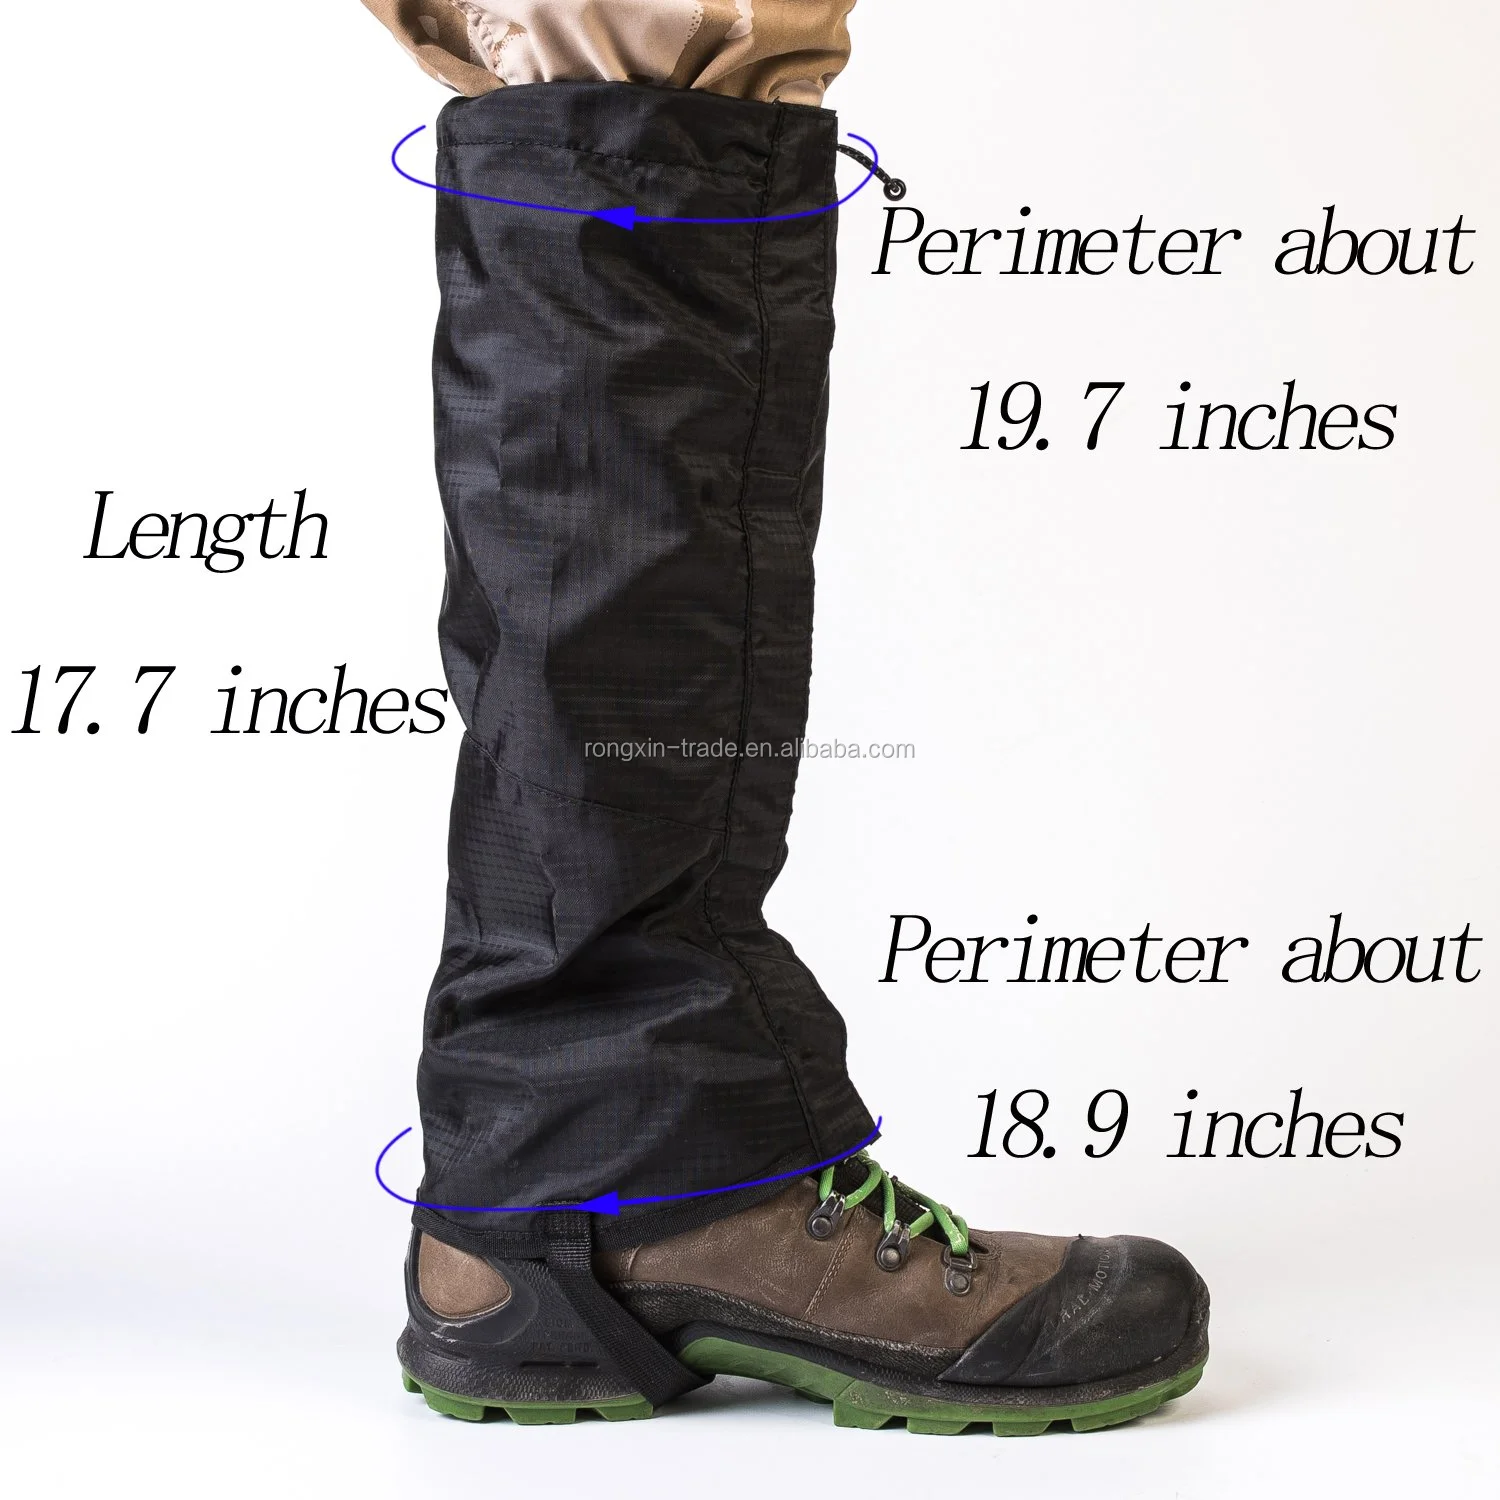 SOBIKE Wear Resistant Outdoor Hiking Leg Gaiter Waterproof Durable High Snow Gaiters Shoes Boots Cover Mountain Sports 